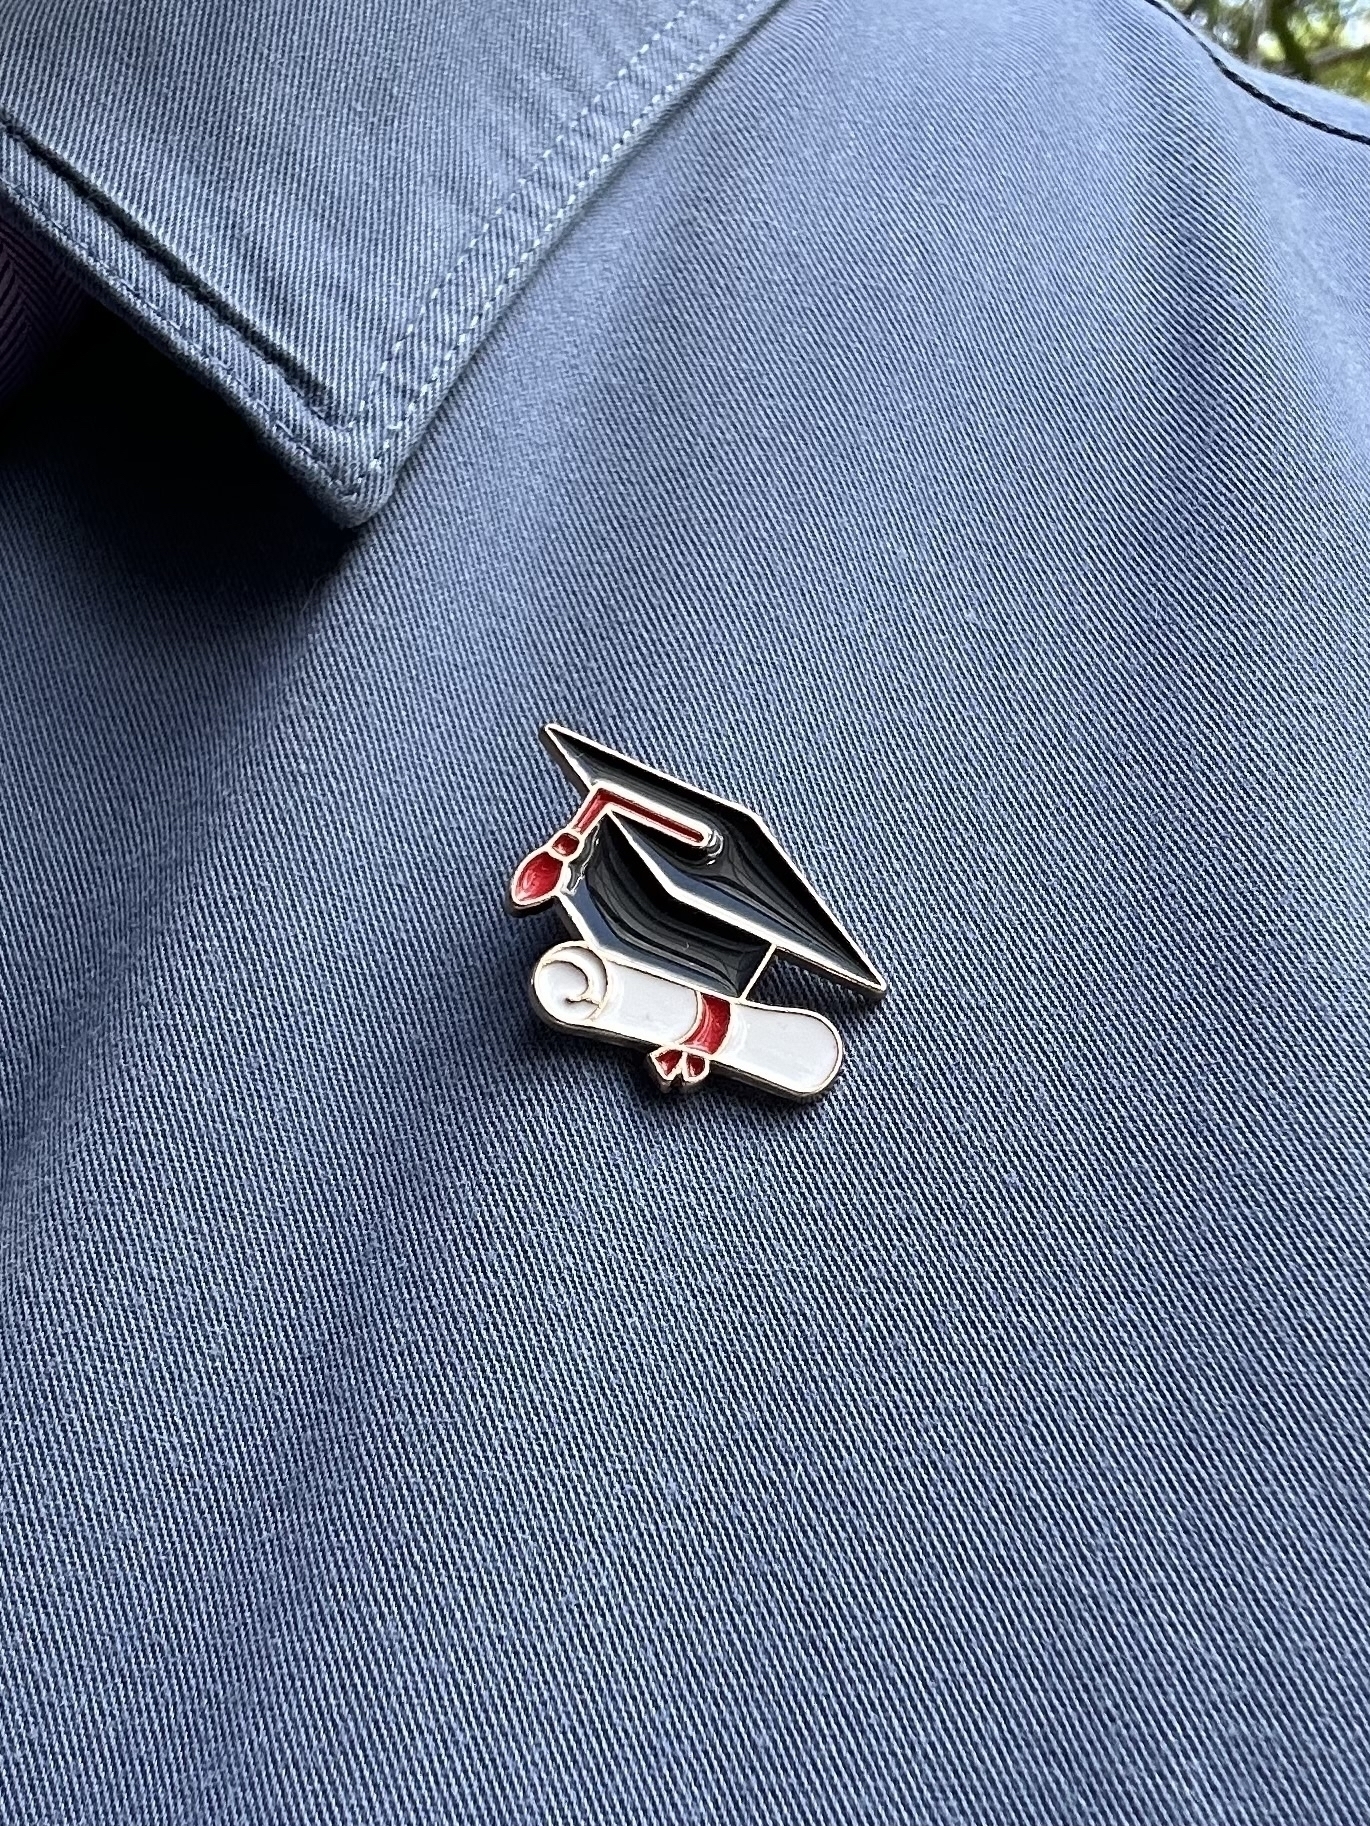 A lapel badge pinned on a blue shirt. The badge is a black mortar board with red tassle above a rolled up white document with a red ribbon around it.